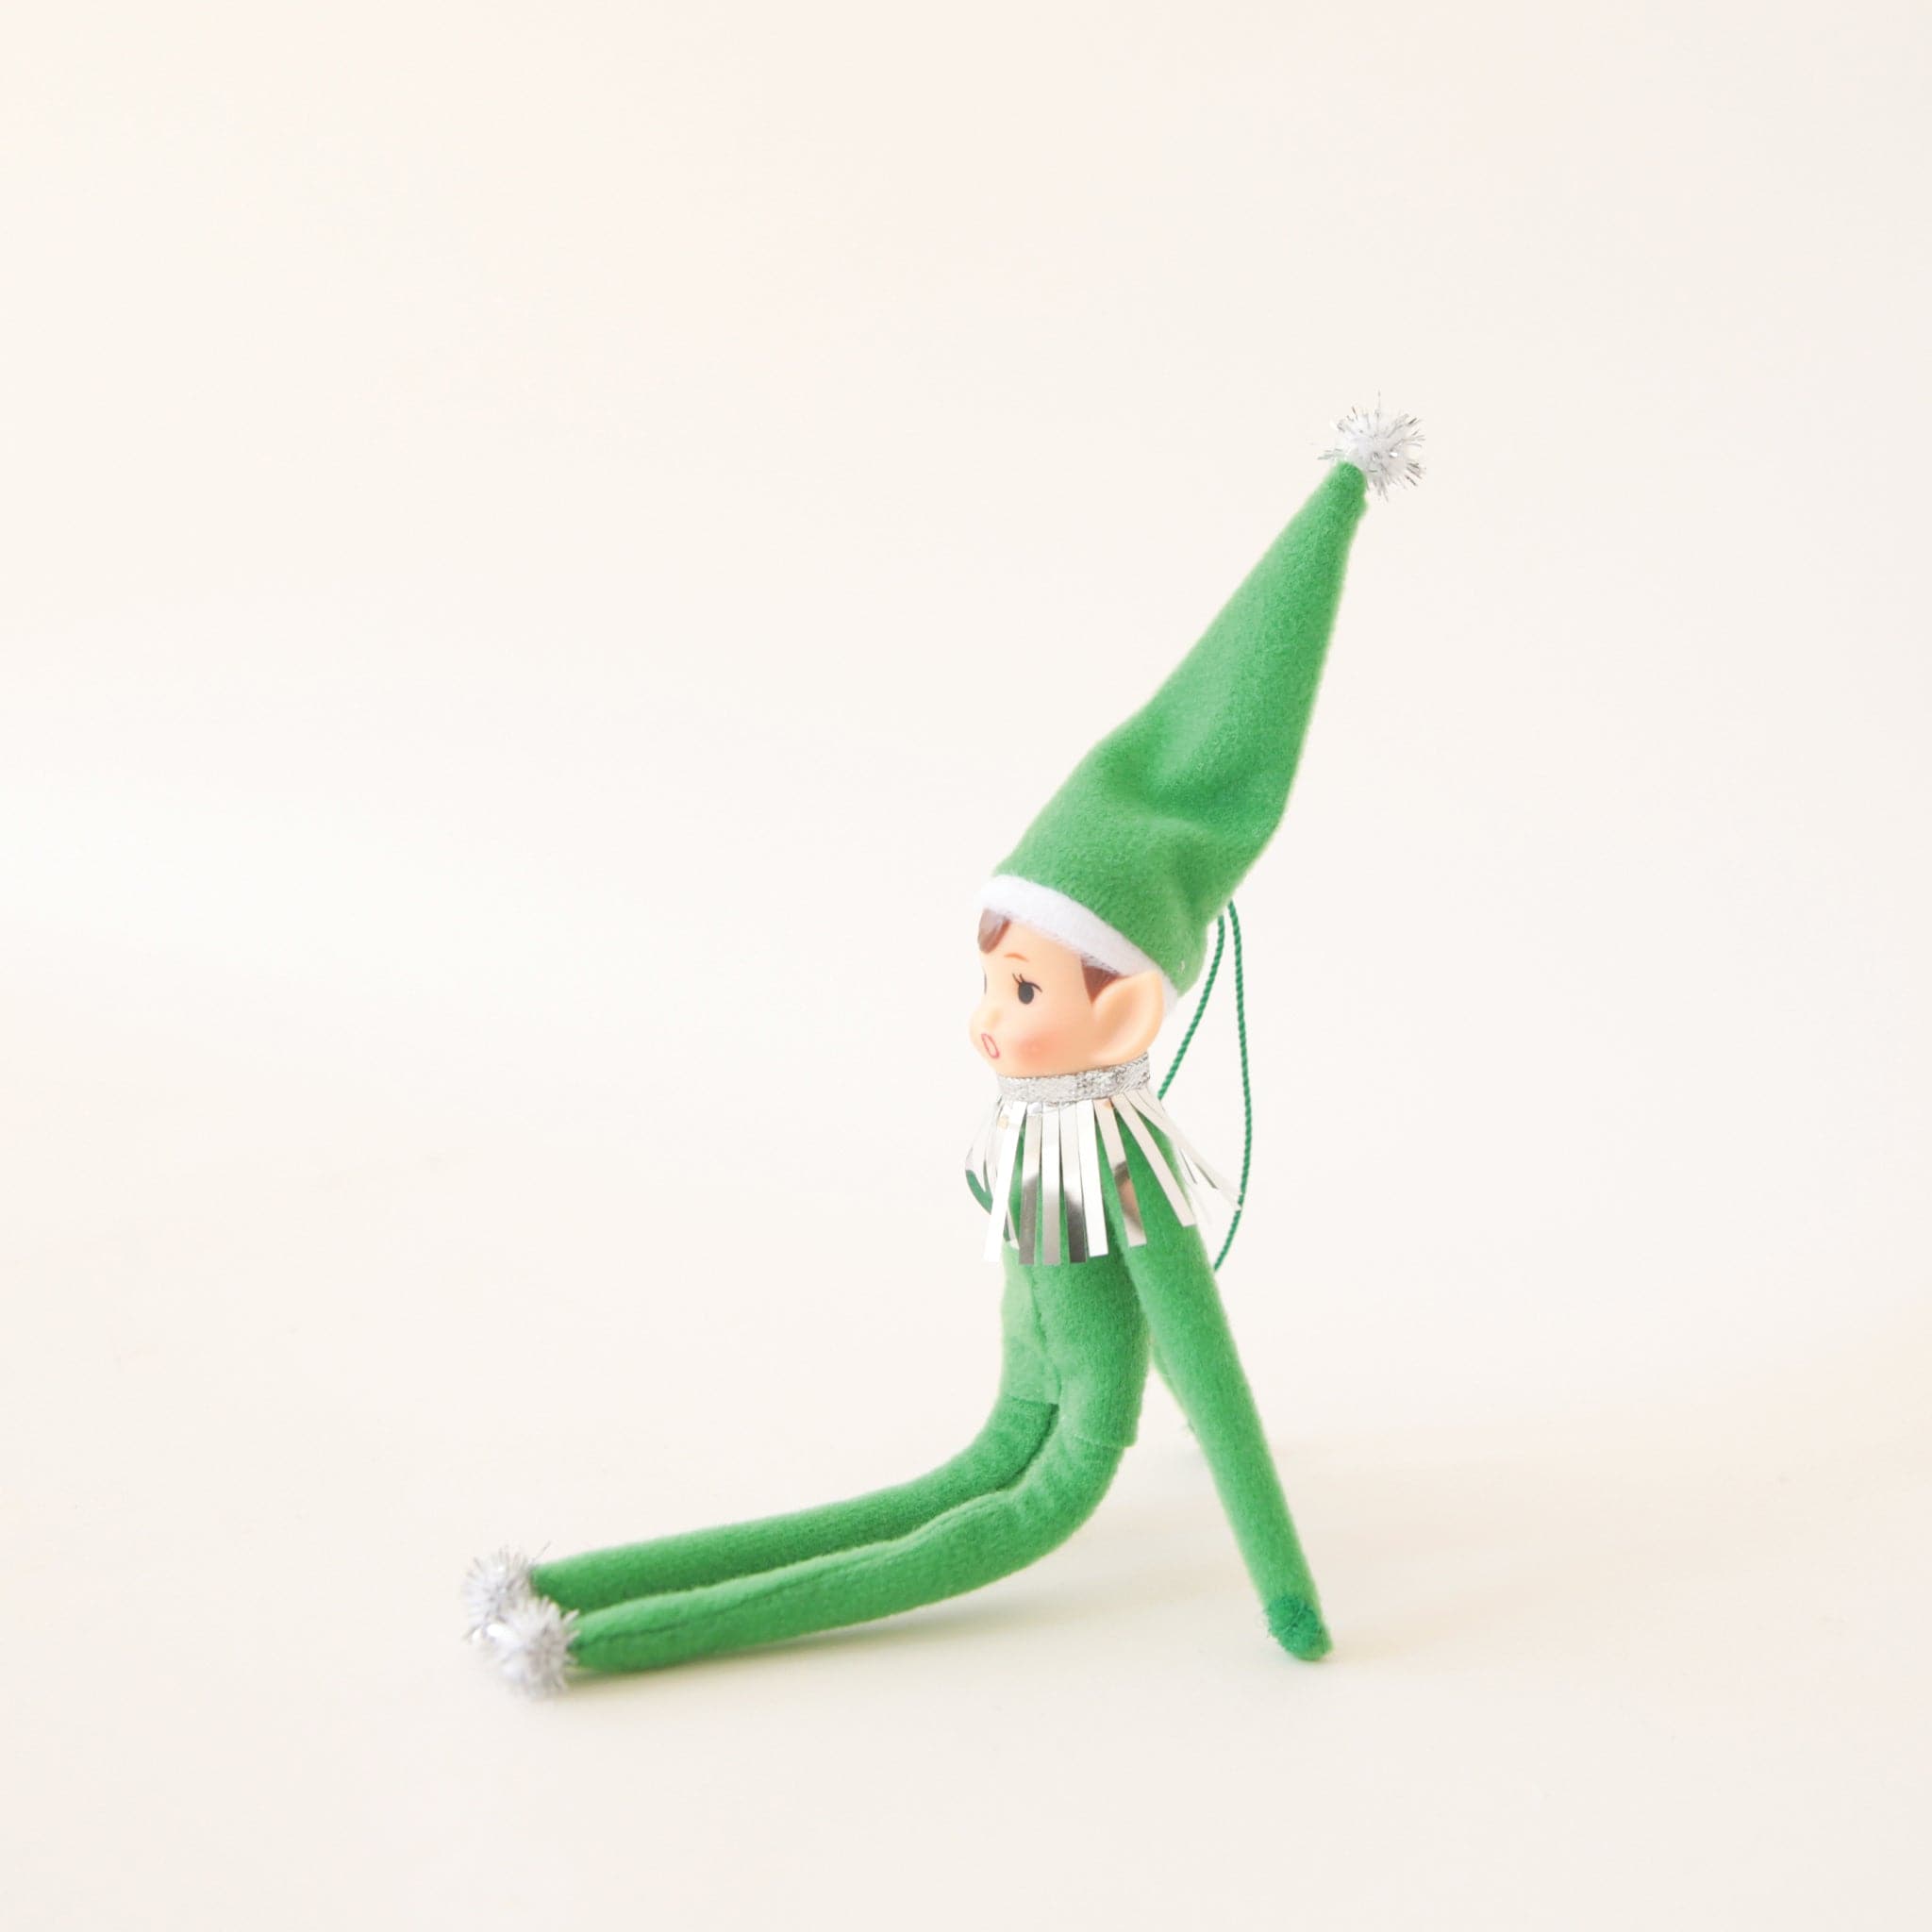 On a cream background is a green elf ornament with bendy arms and legs and a green loop for hanging.